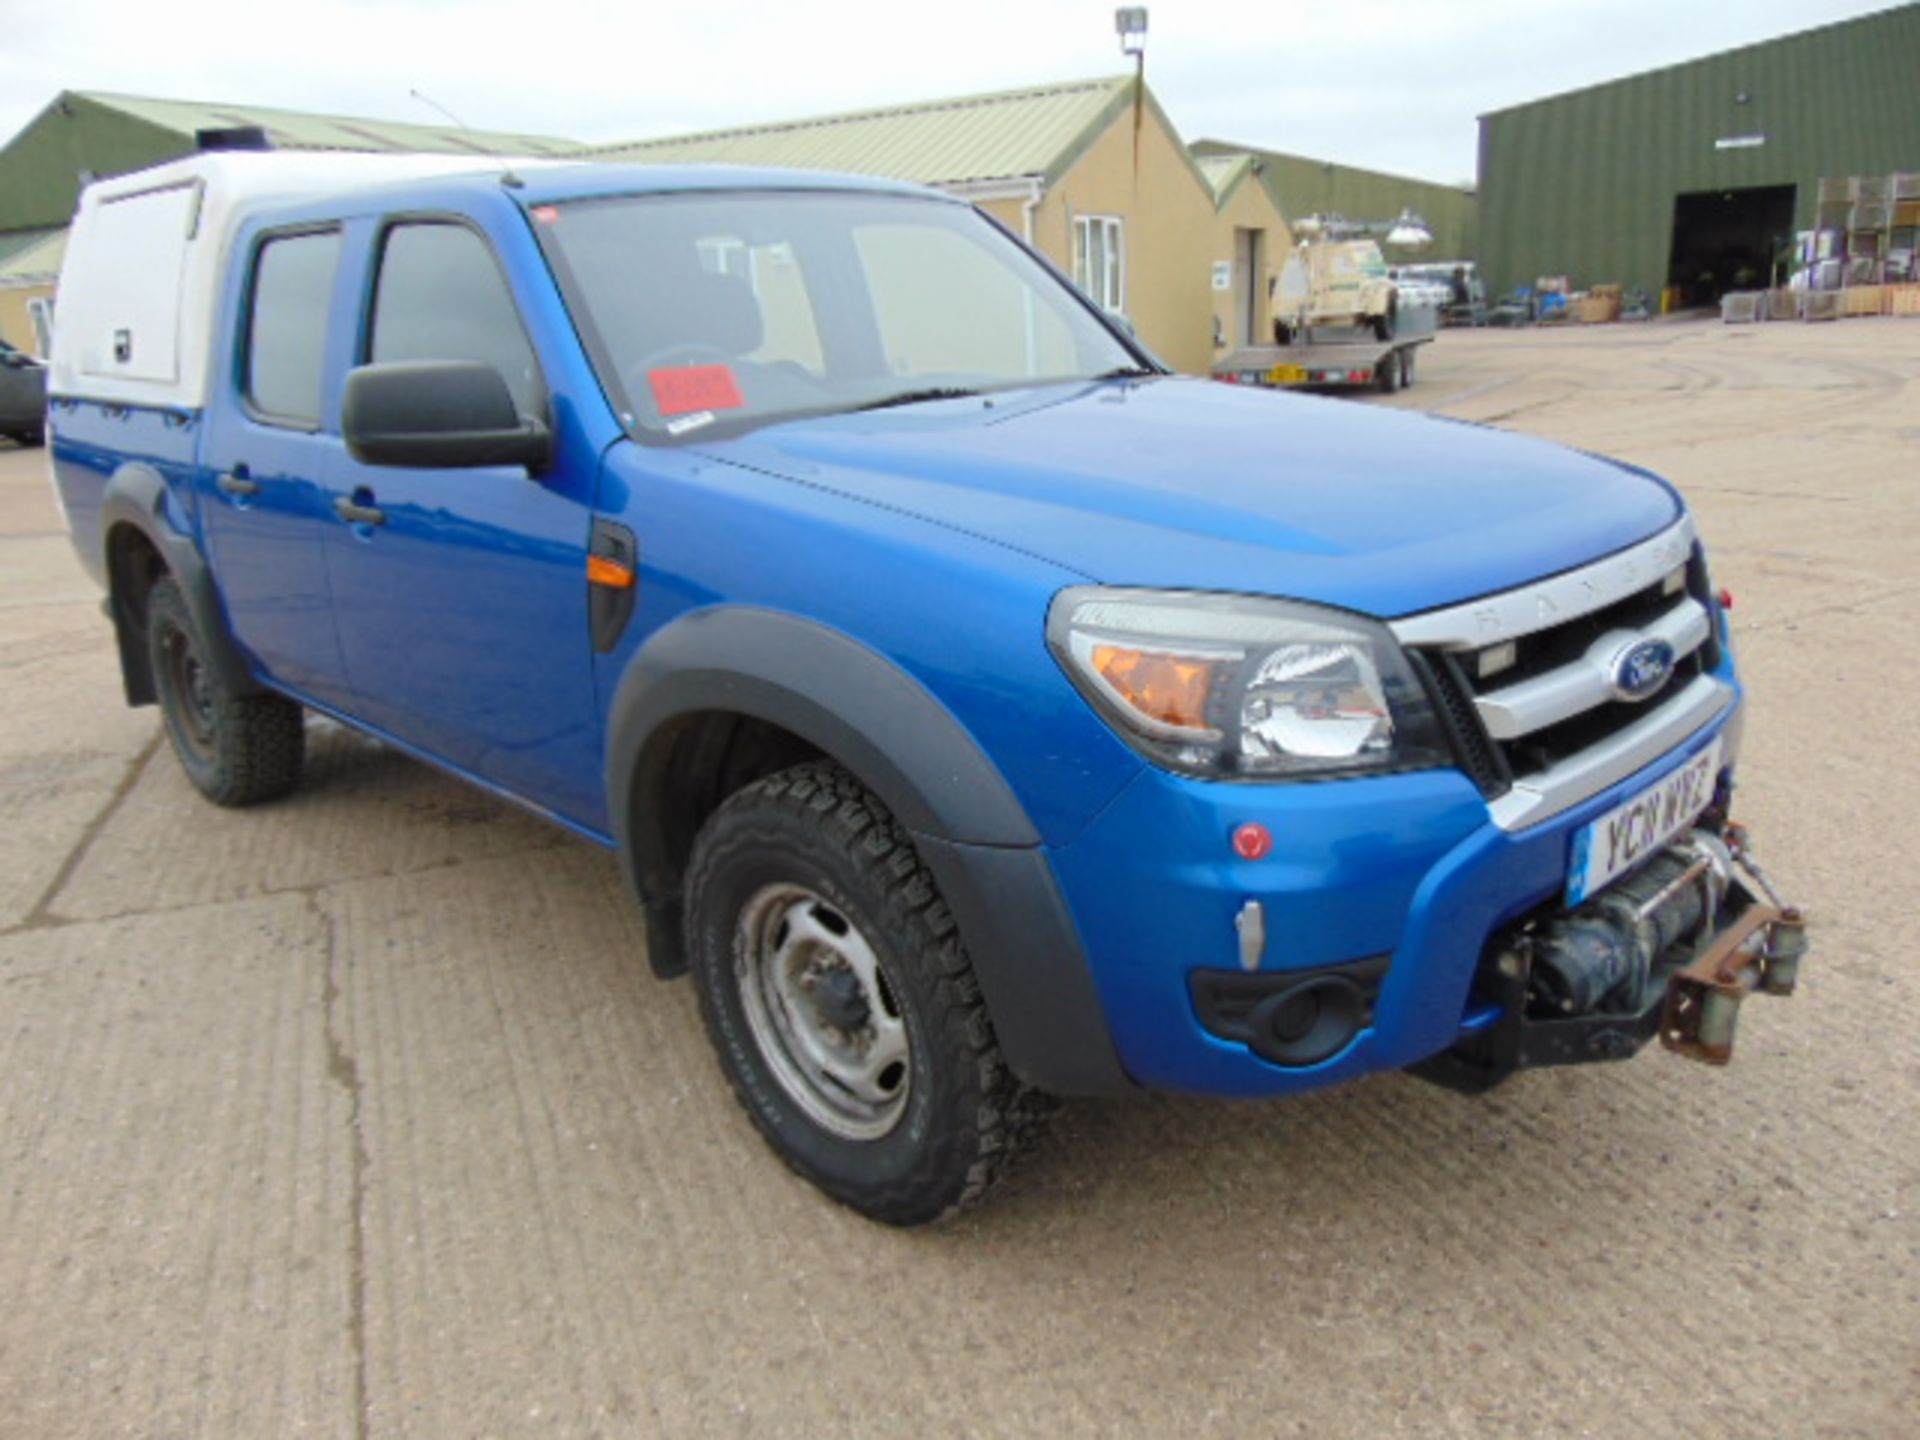 2011 Ford Ranger Double cab pickup (Mobile Workshop) complete with SuperWinch